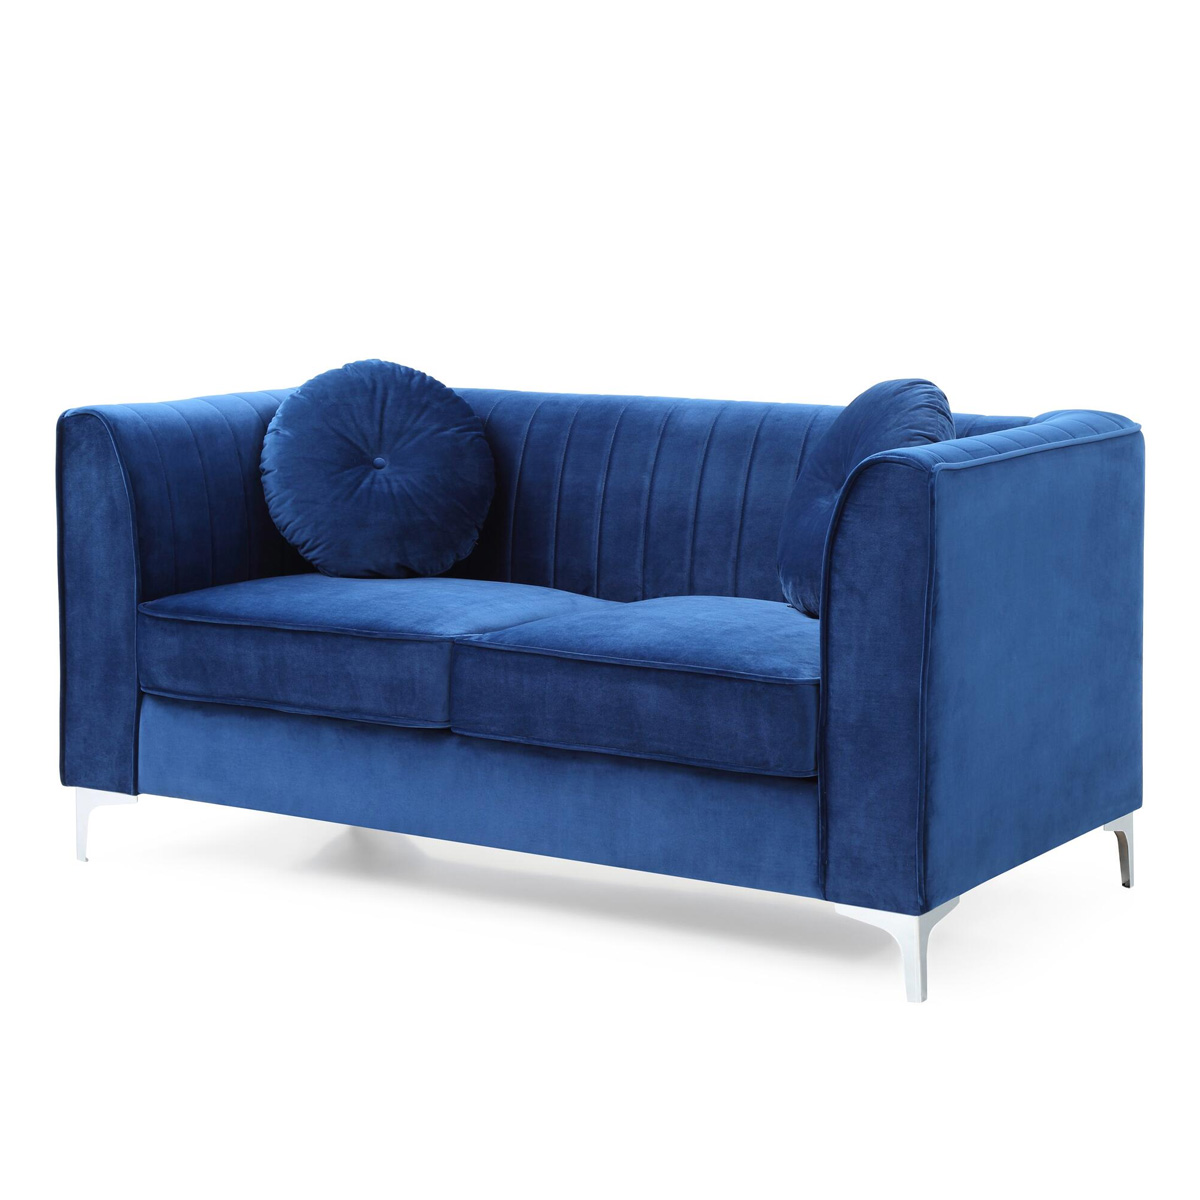 Sandra Sofa in Navy Blue Color from AED 2449 -AtoZ Furniture